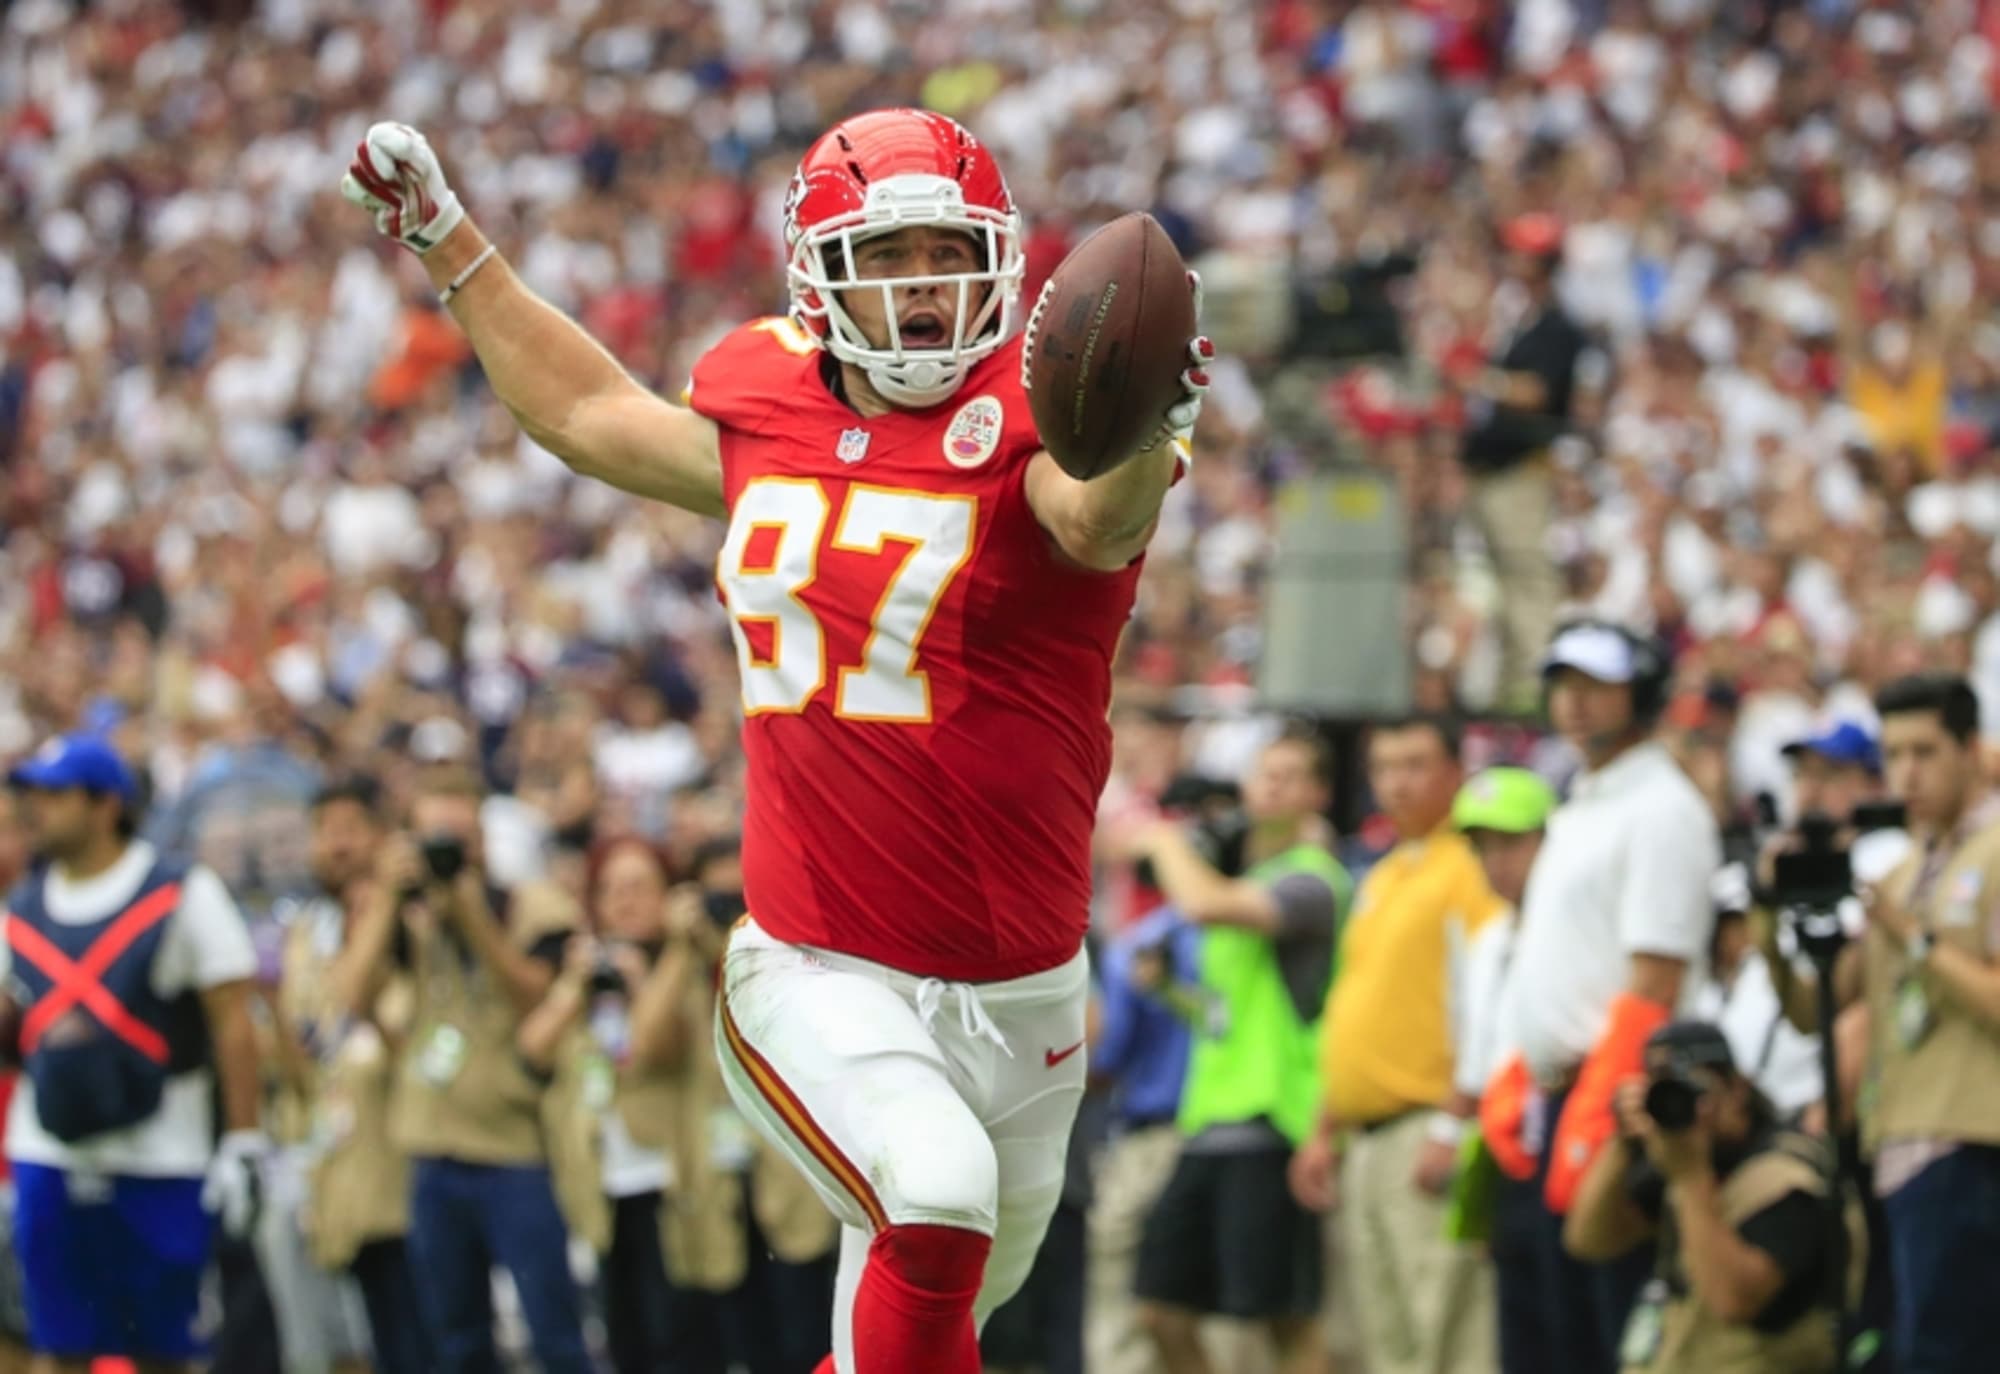 Predictions for Kansas City Chiefs' key playmakers